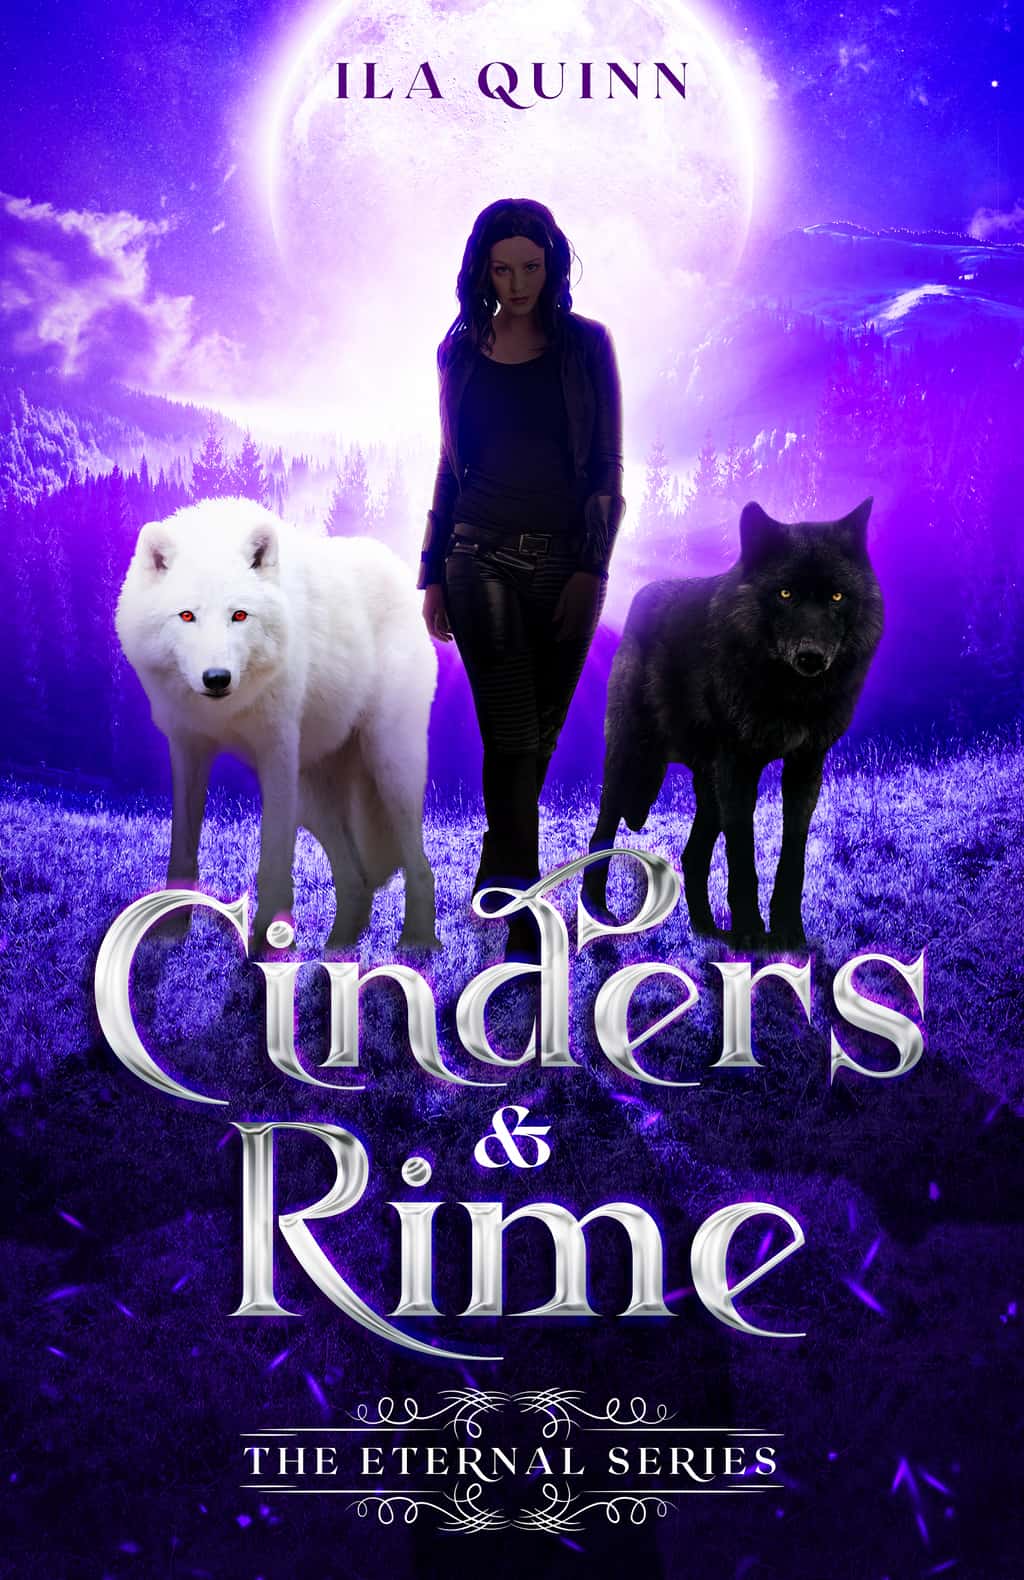 Cinders Rime book cover